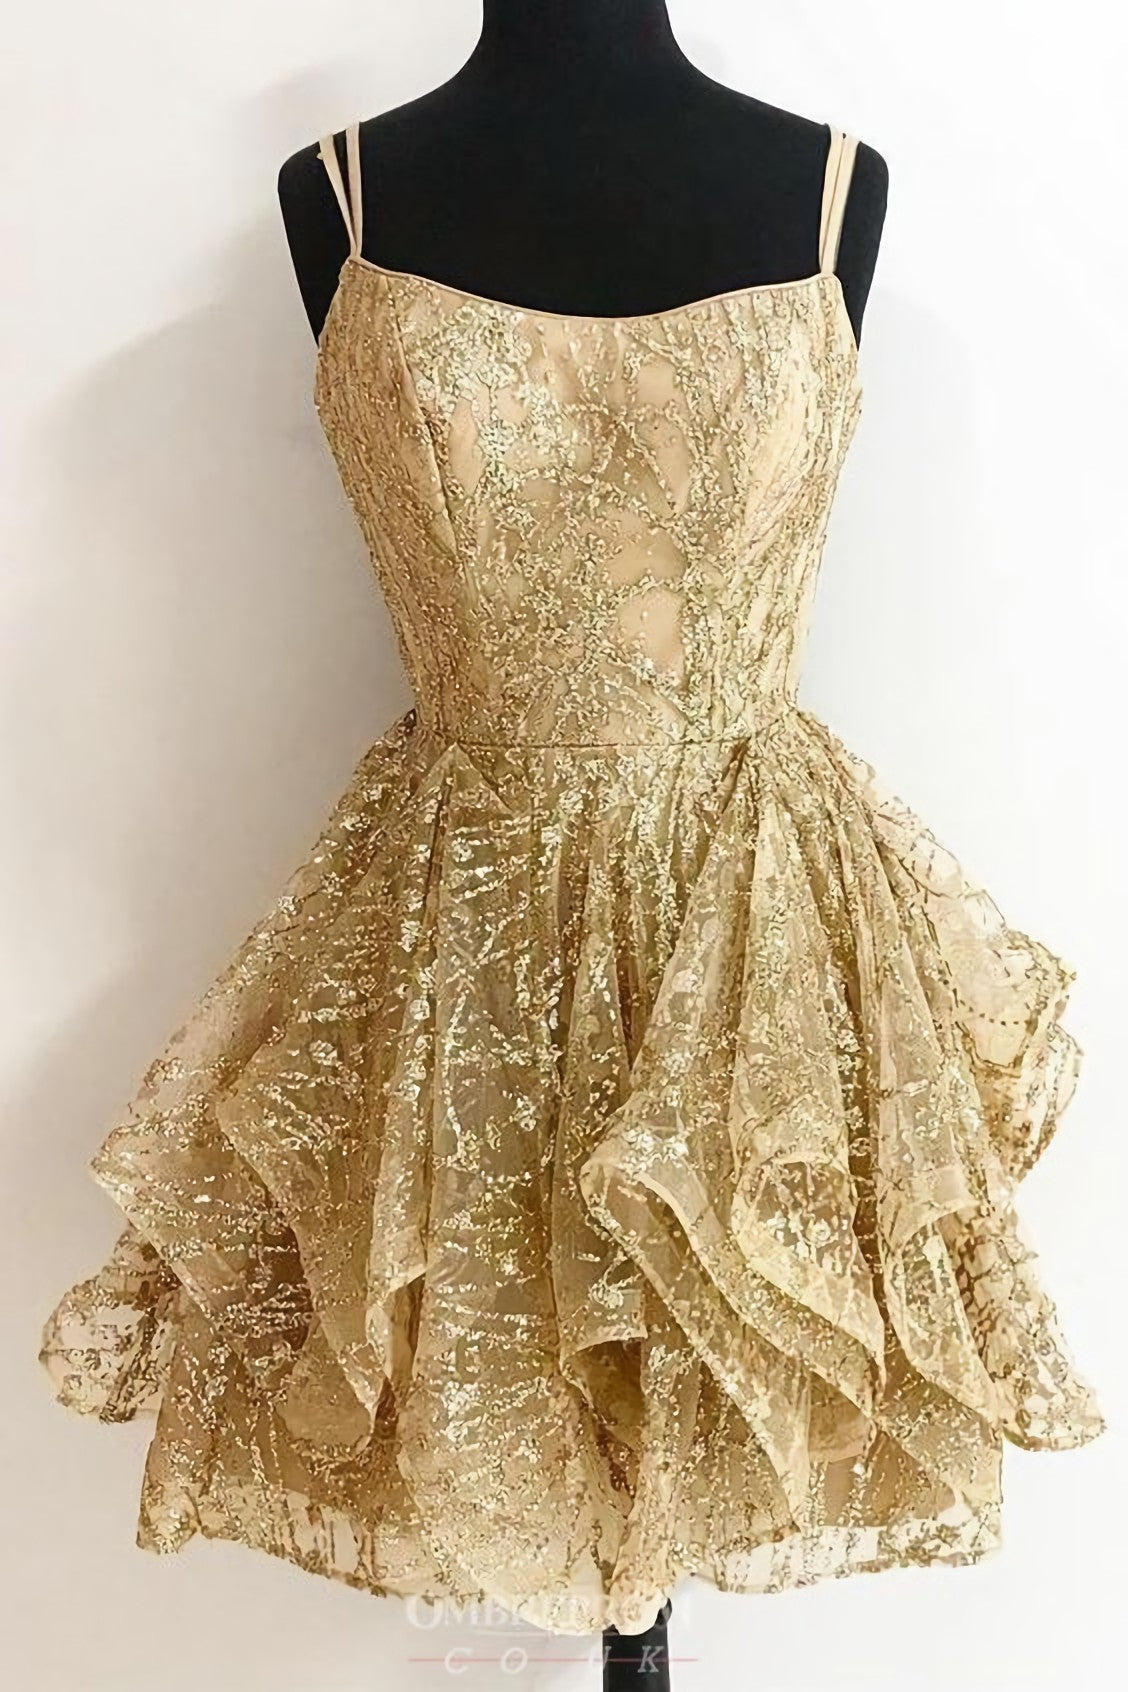 A Line Sequins Gold Short Corset Homecoming Dresses, Glitter Cocktail Party Dress Outfits, Prom Dresses Laced